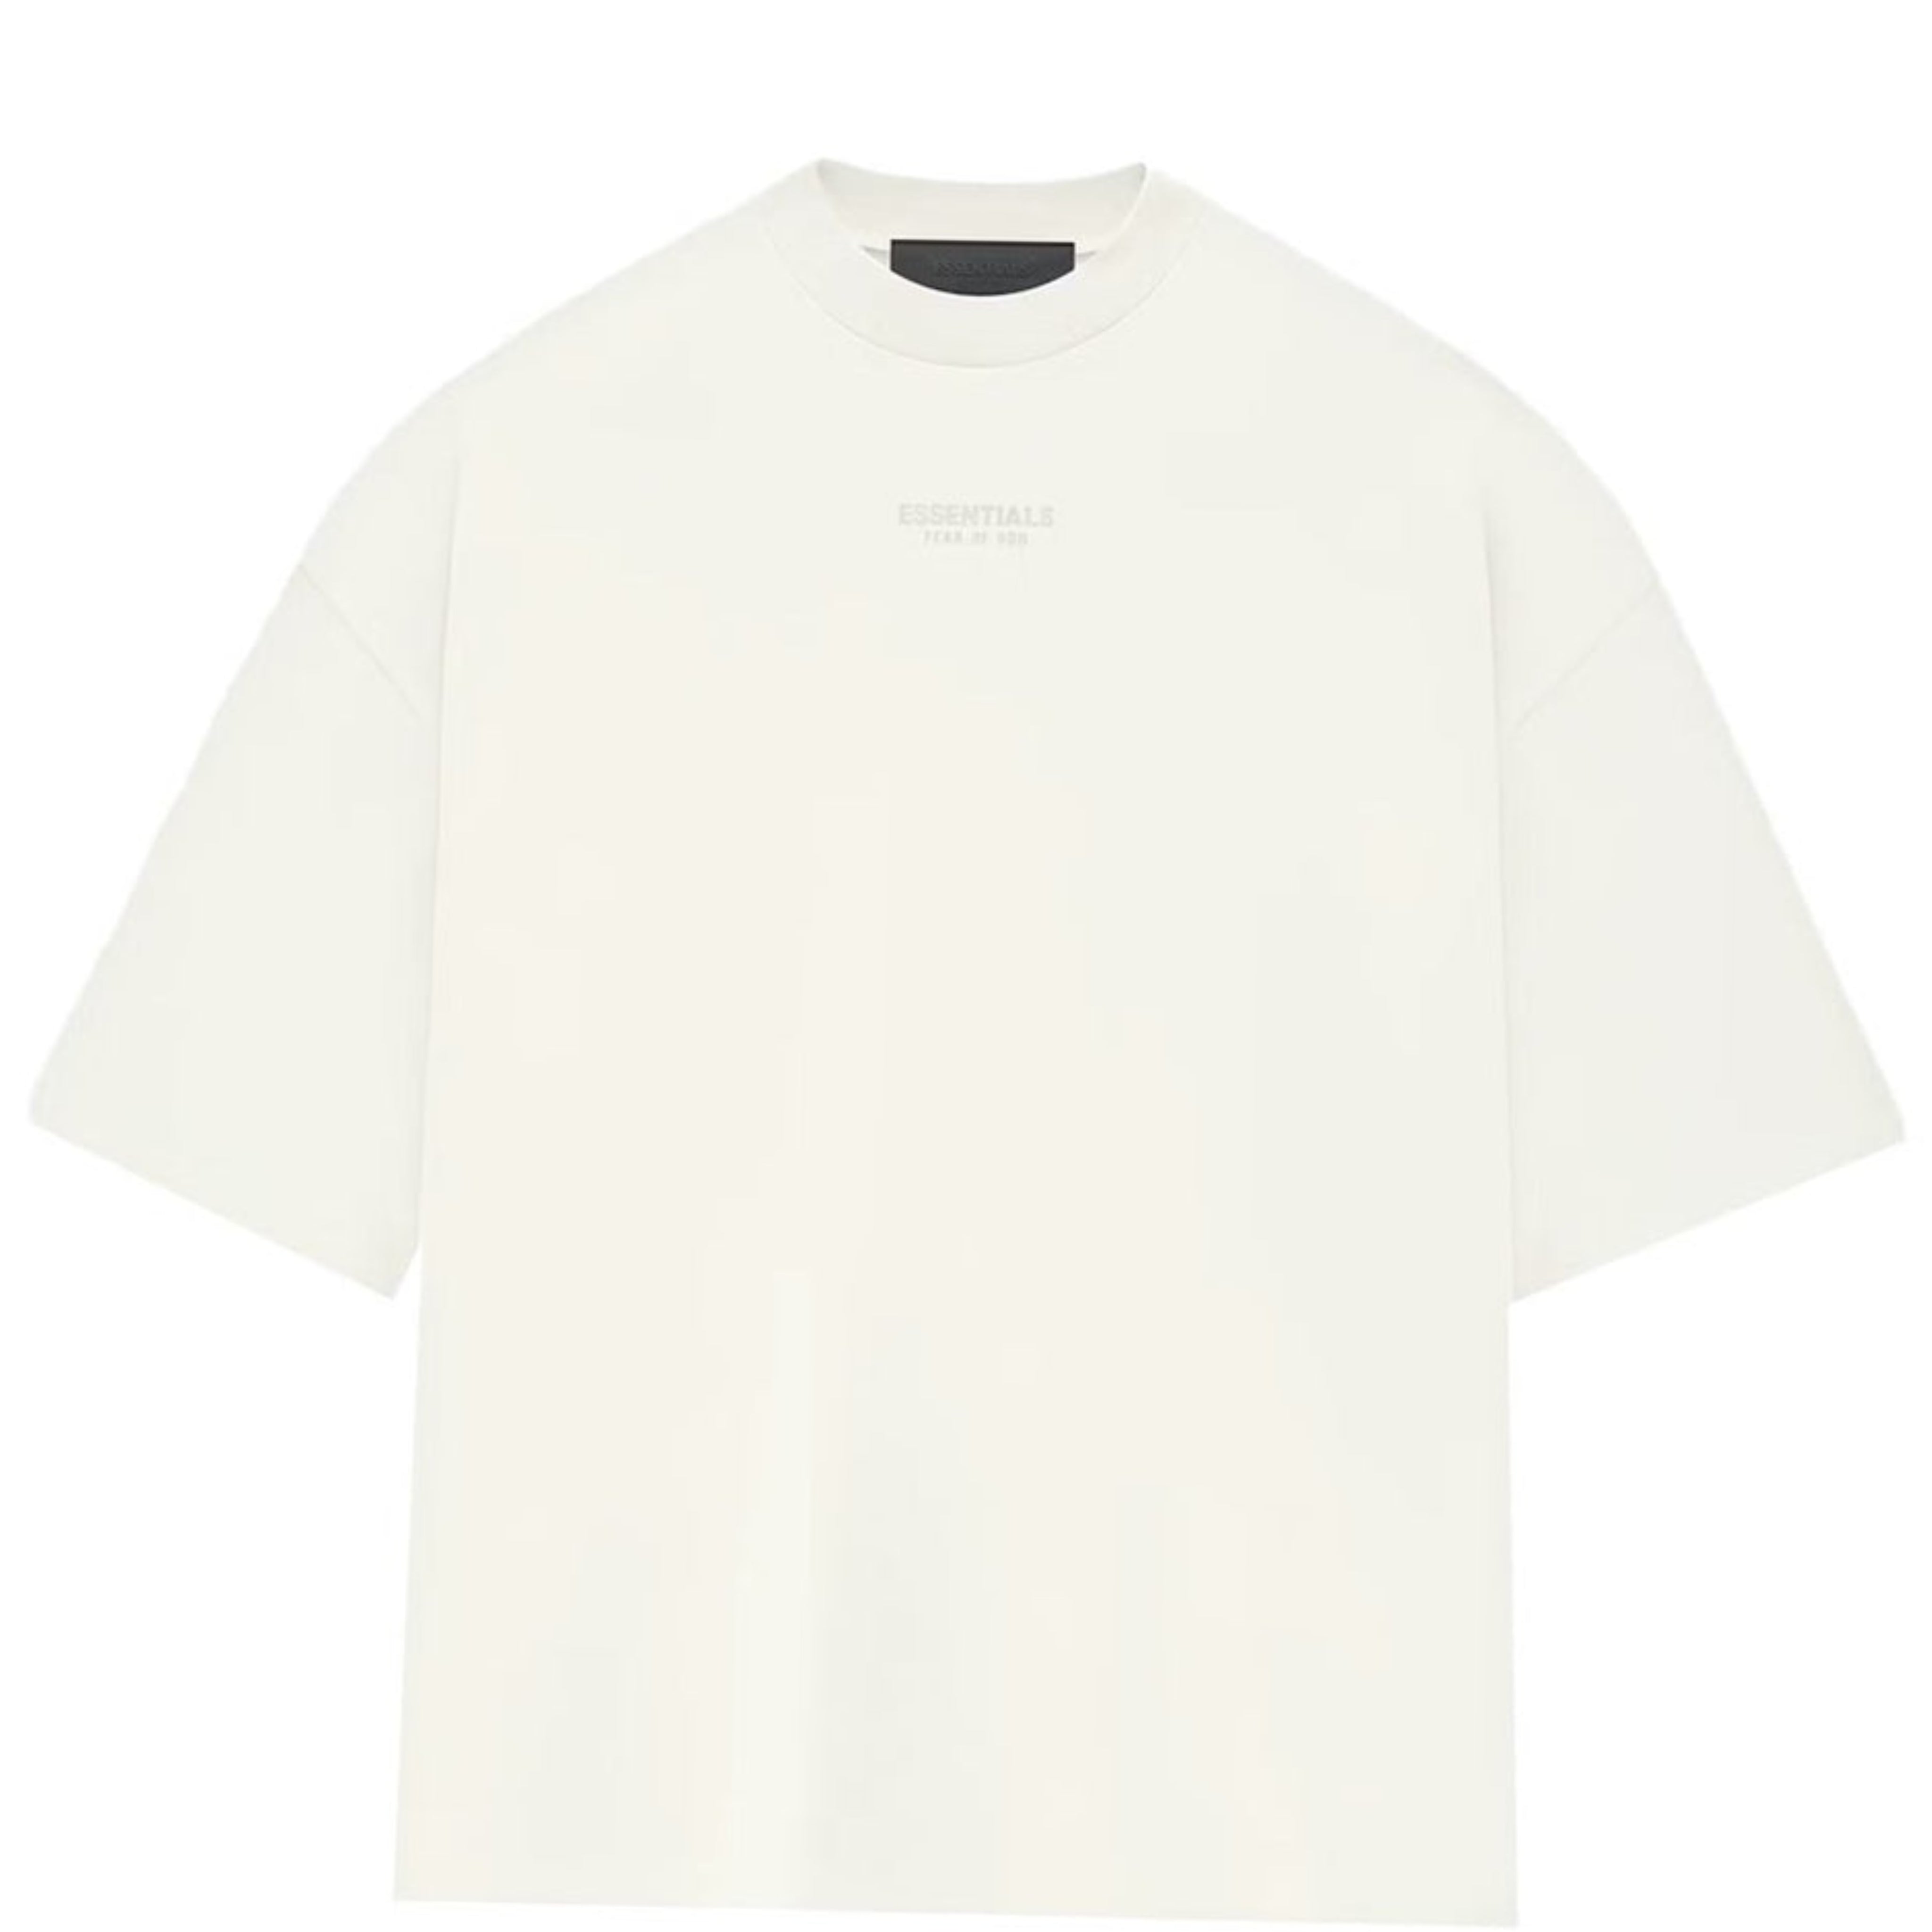 WHERE TO BUY FEAR OF GOD ESSENTIALS